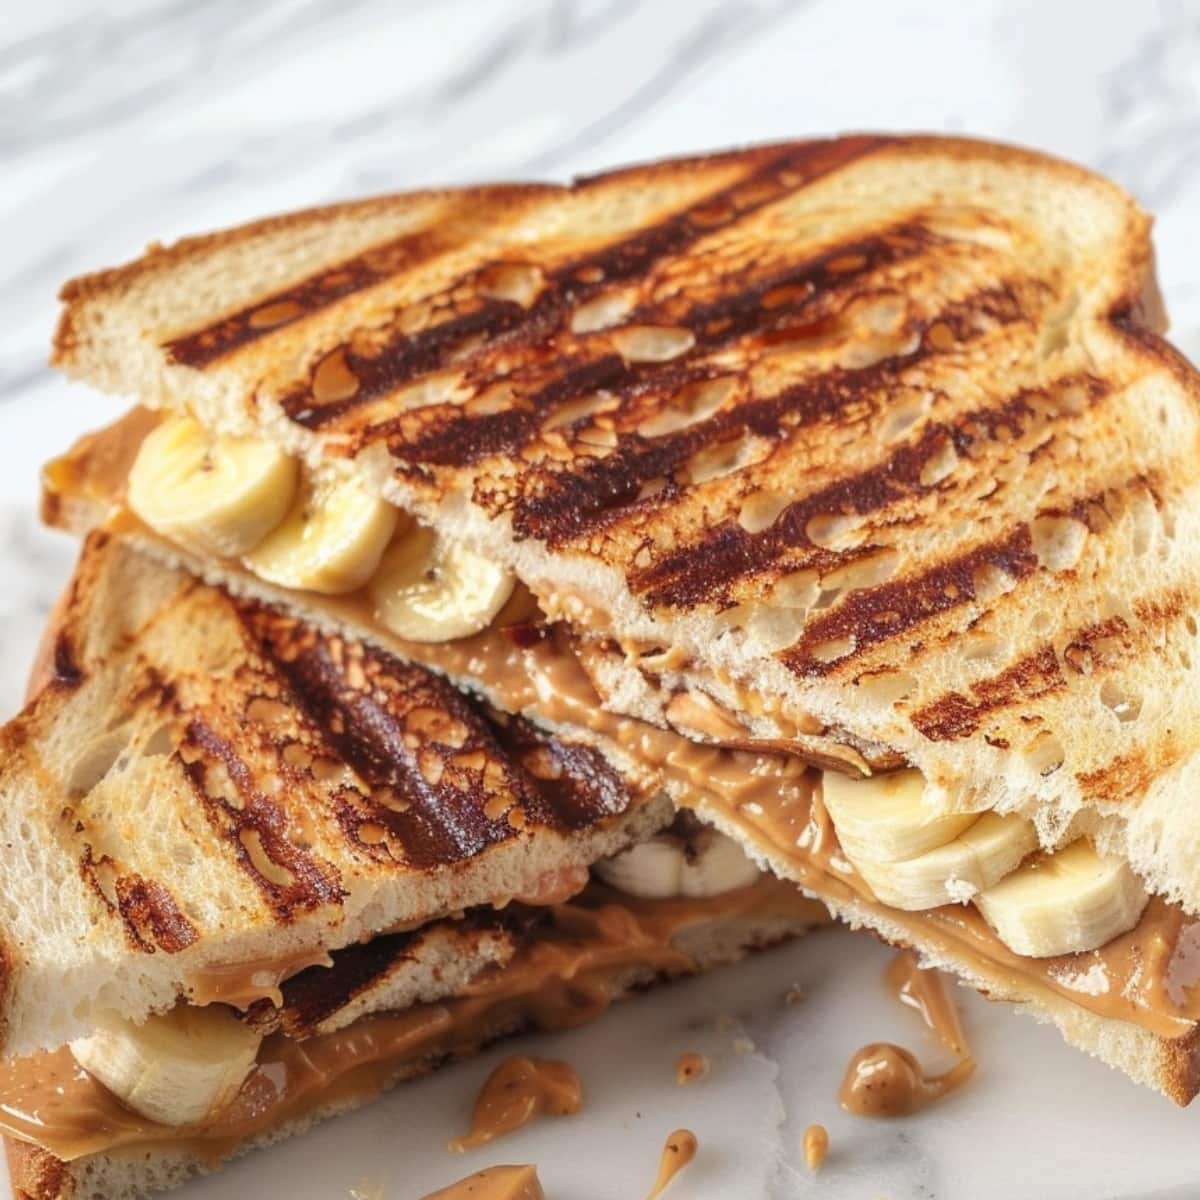 Grilled loaf of bread with banana and peanut butter filling.